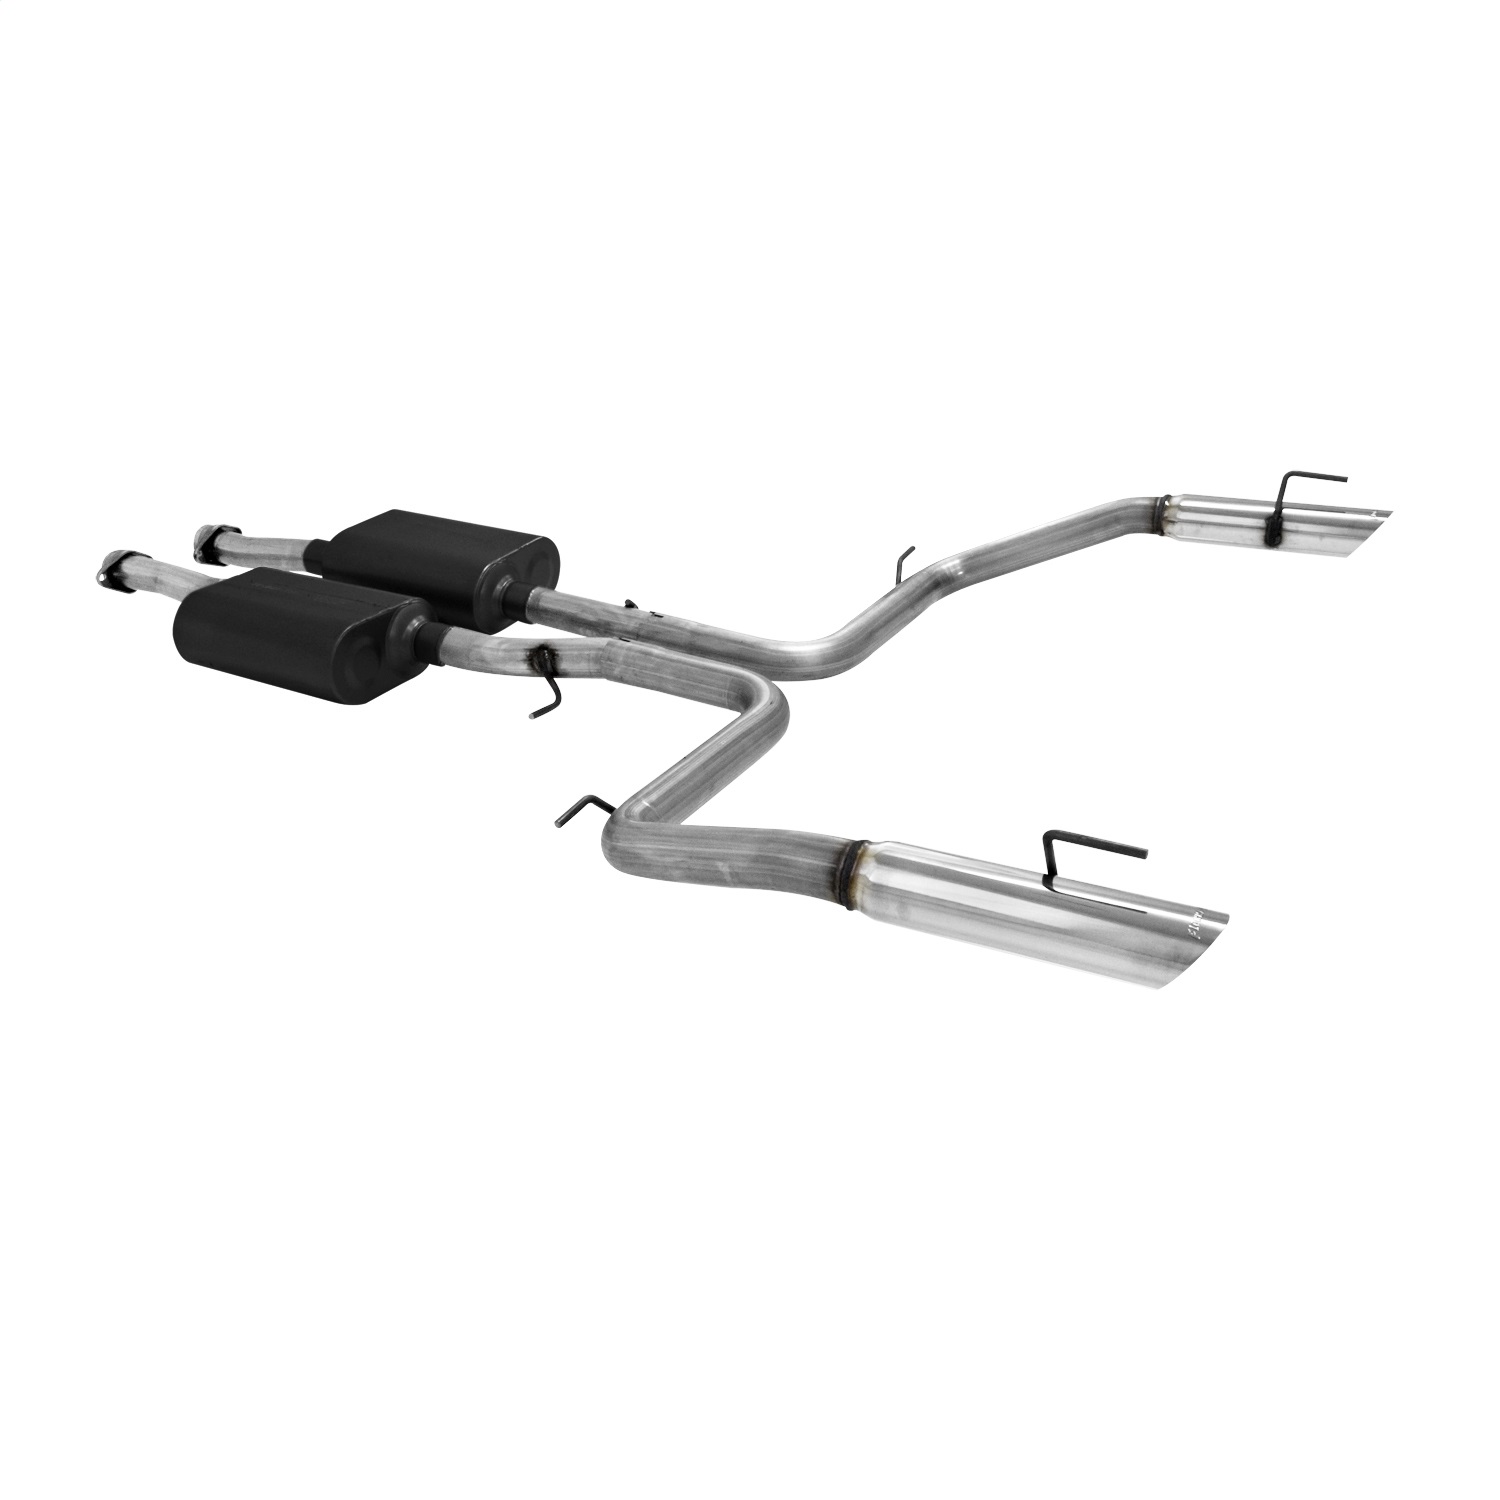 Flowmaster Flowmaster 817248 American Thunder Cat Back Exhaust System Fits 03-04 Mustang